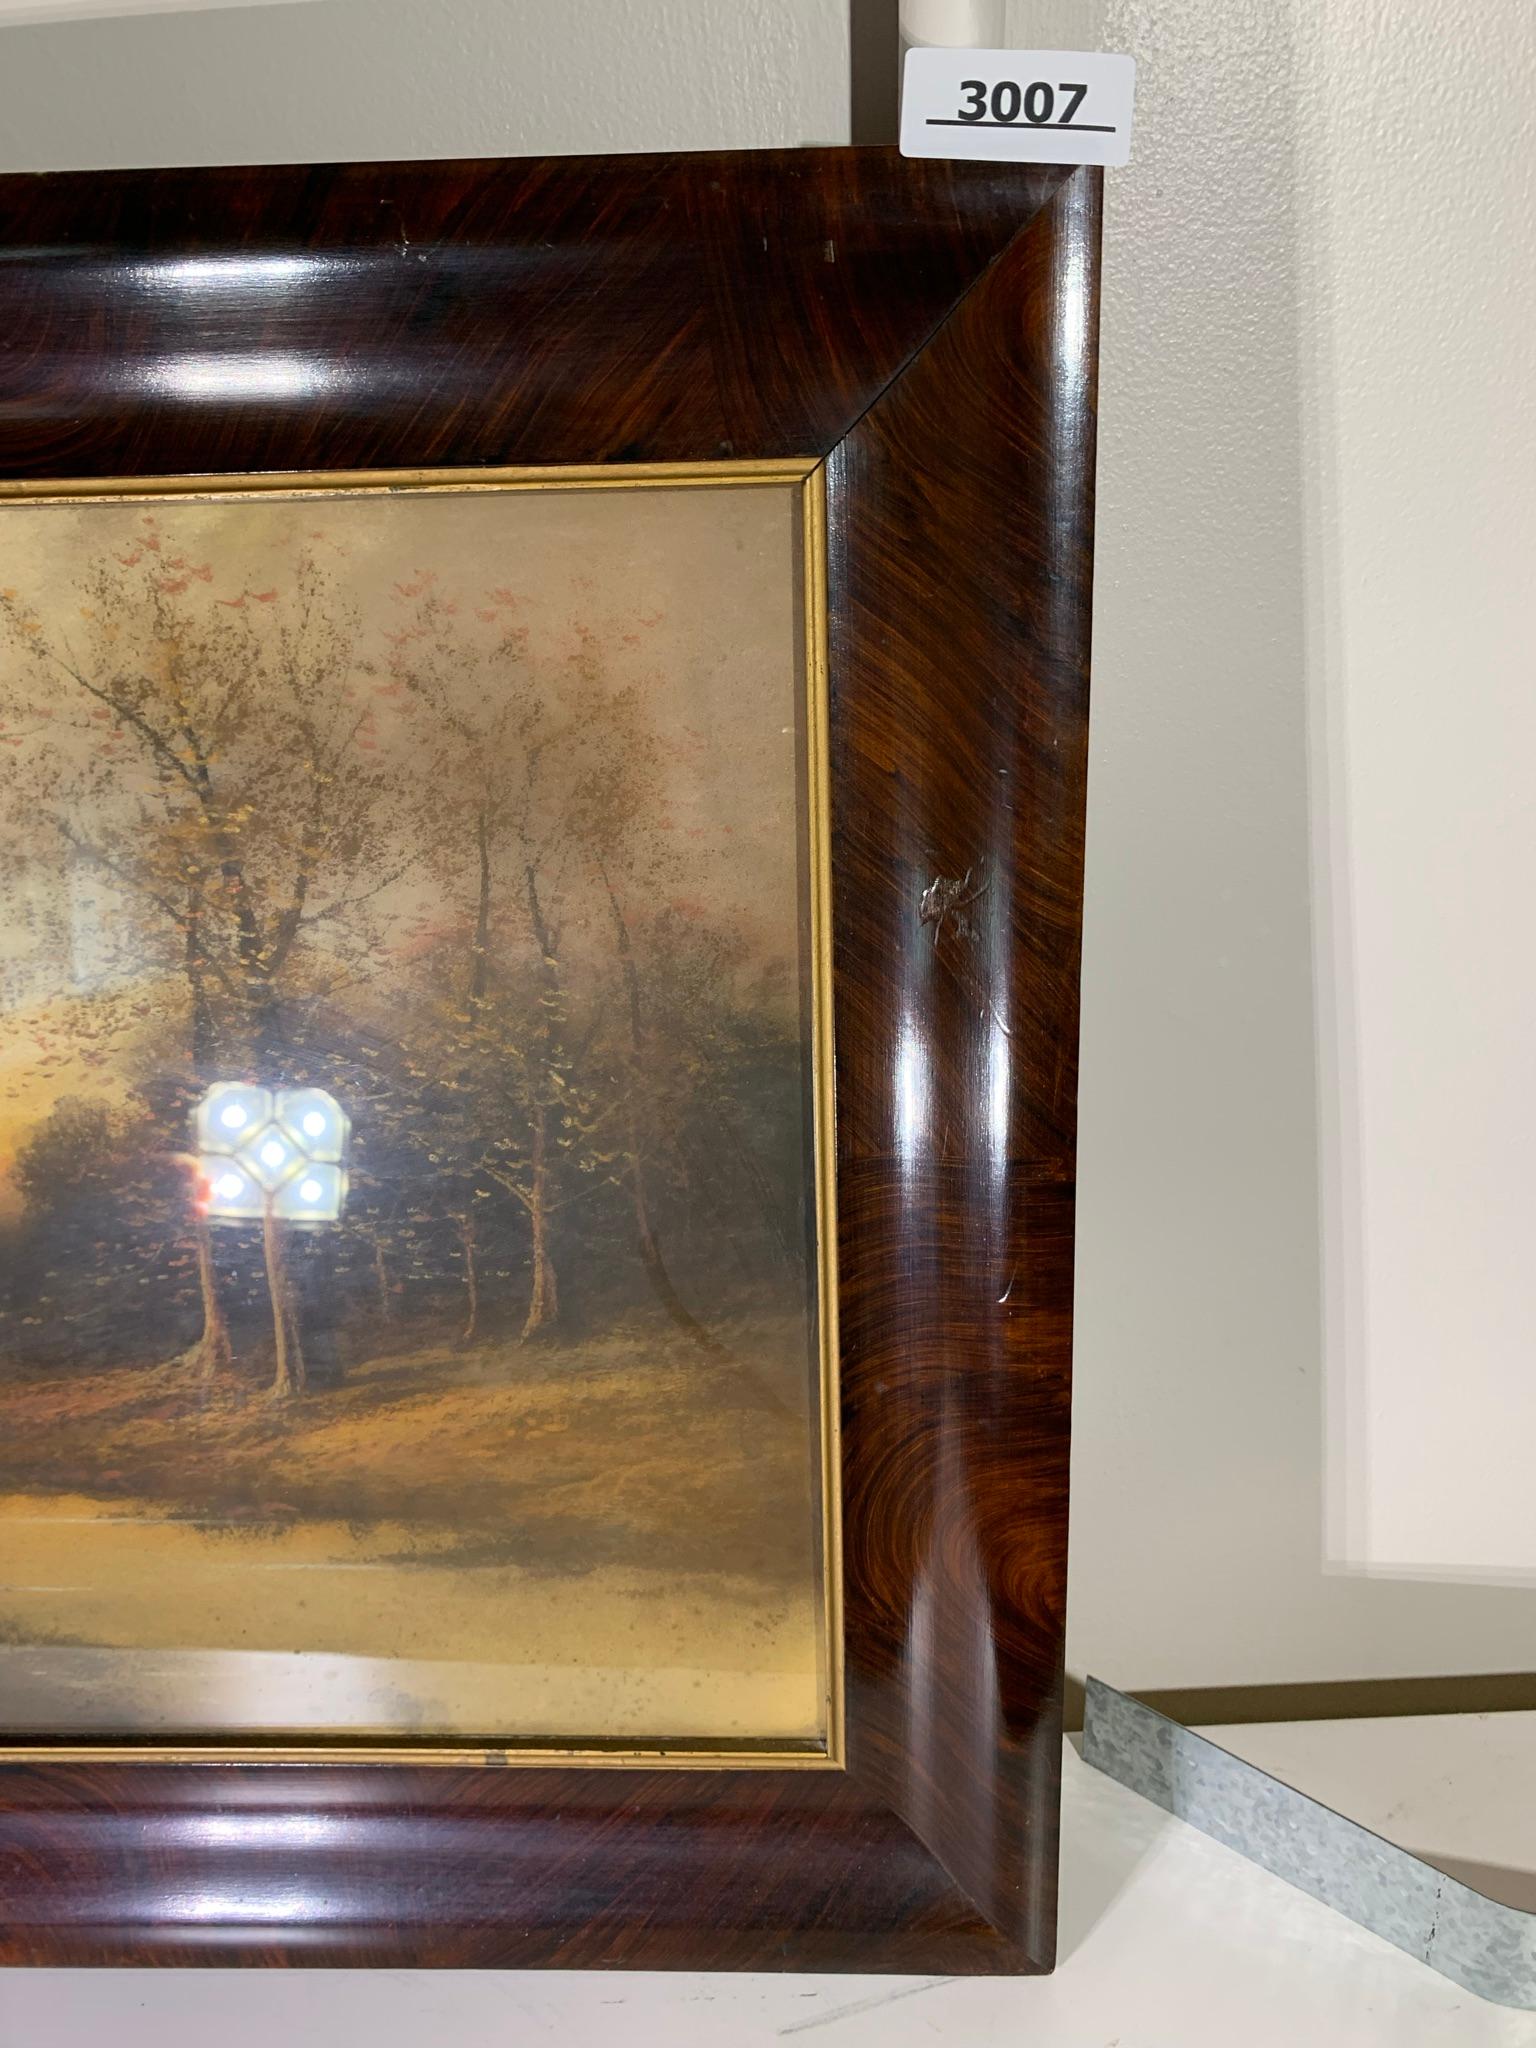 Antique Reverse Painted Scene in Frame